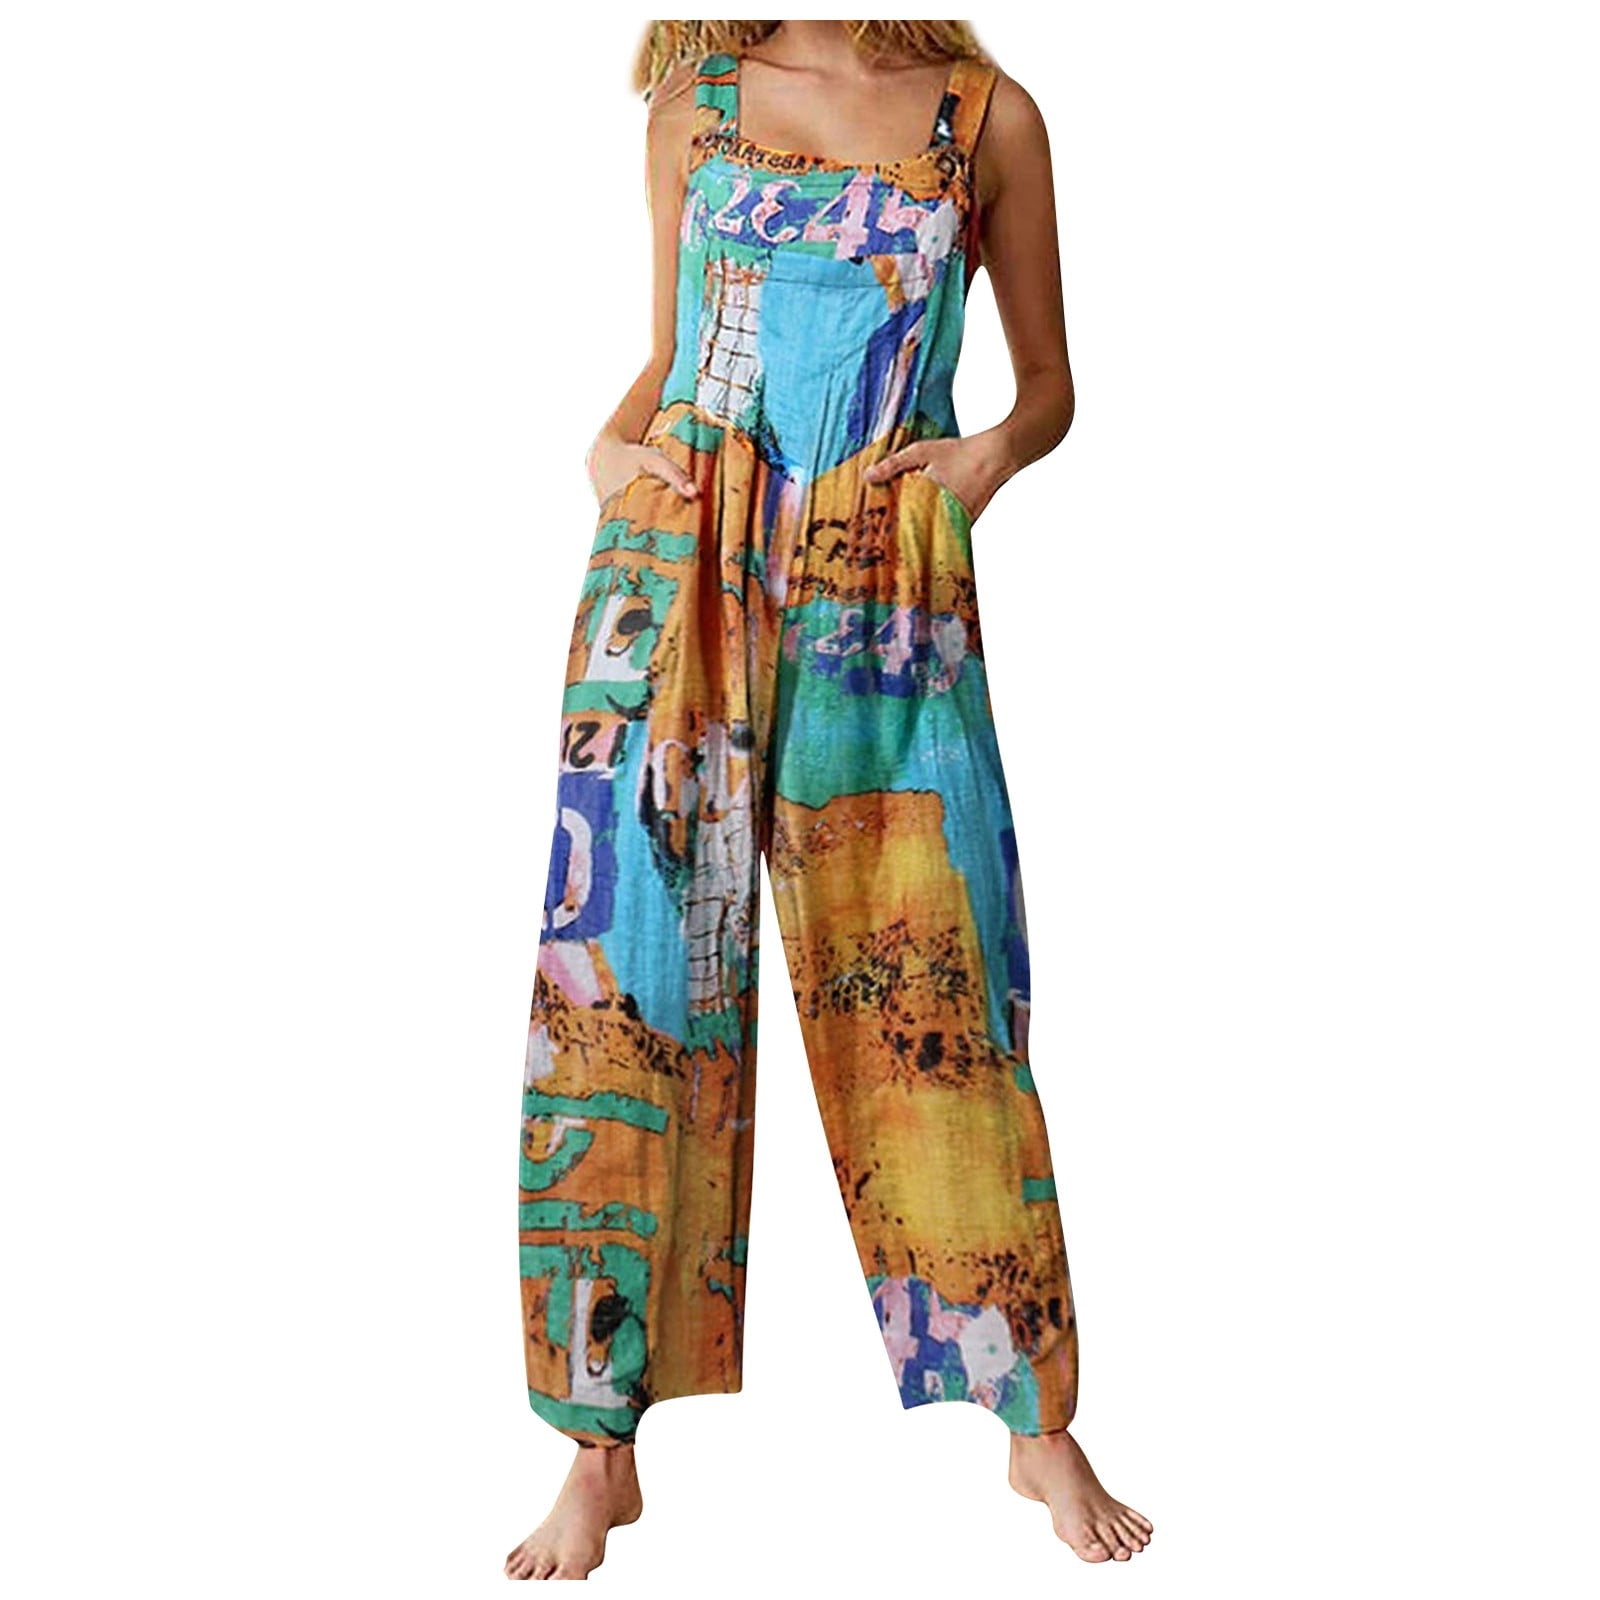 African Jumpsuit With Beads And Diamonds For Women Traditional Amazon Ethnic  Wear For Spring And Autumn Weddings, Parties, And Special Occasions In  Dubai And Turkey From Xanderyoung21, $35.69 | DHgate.Com